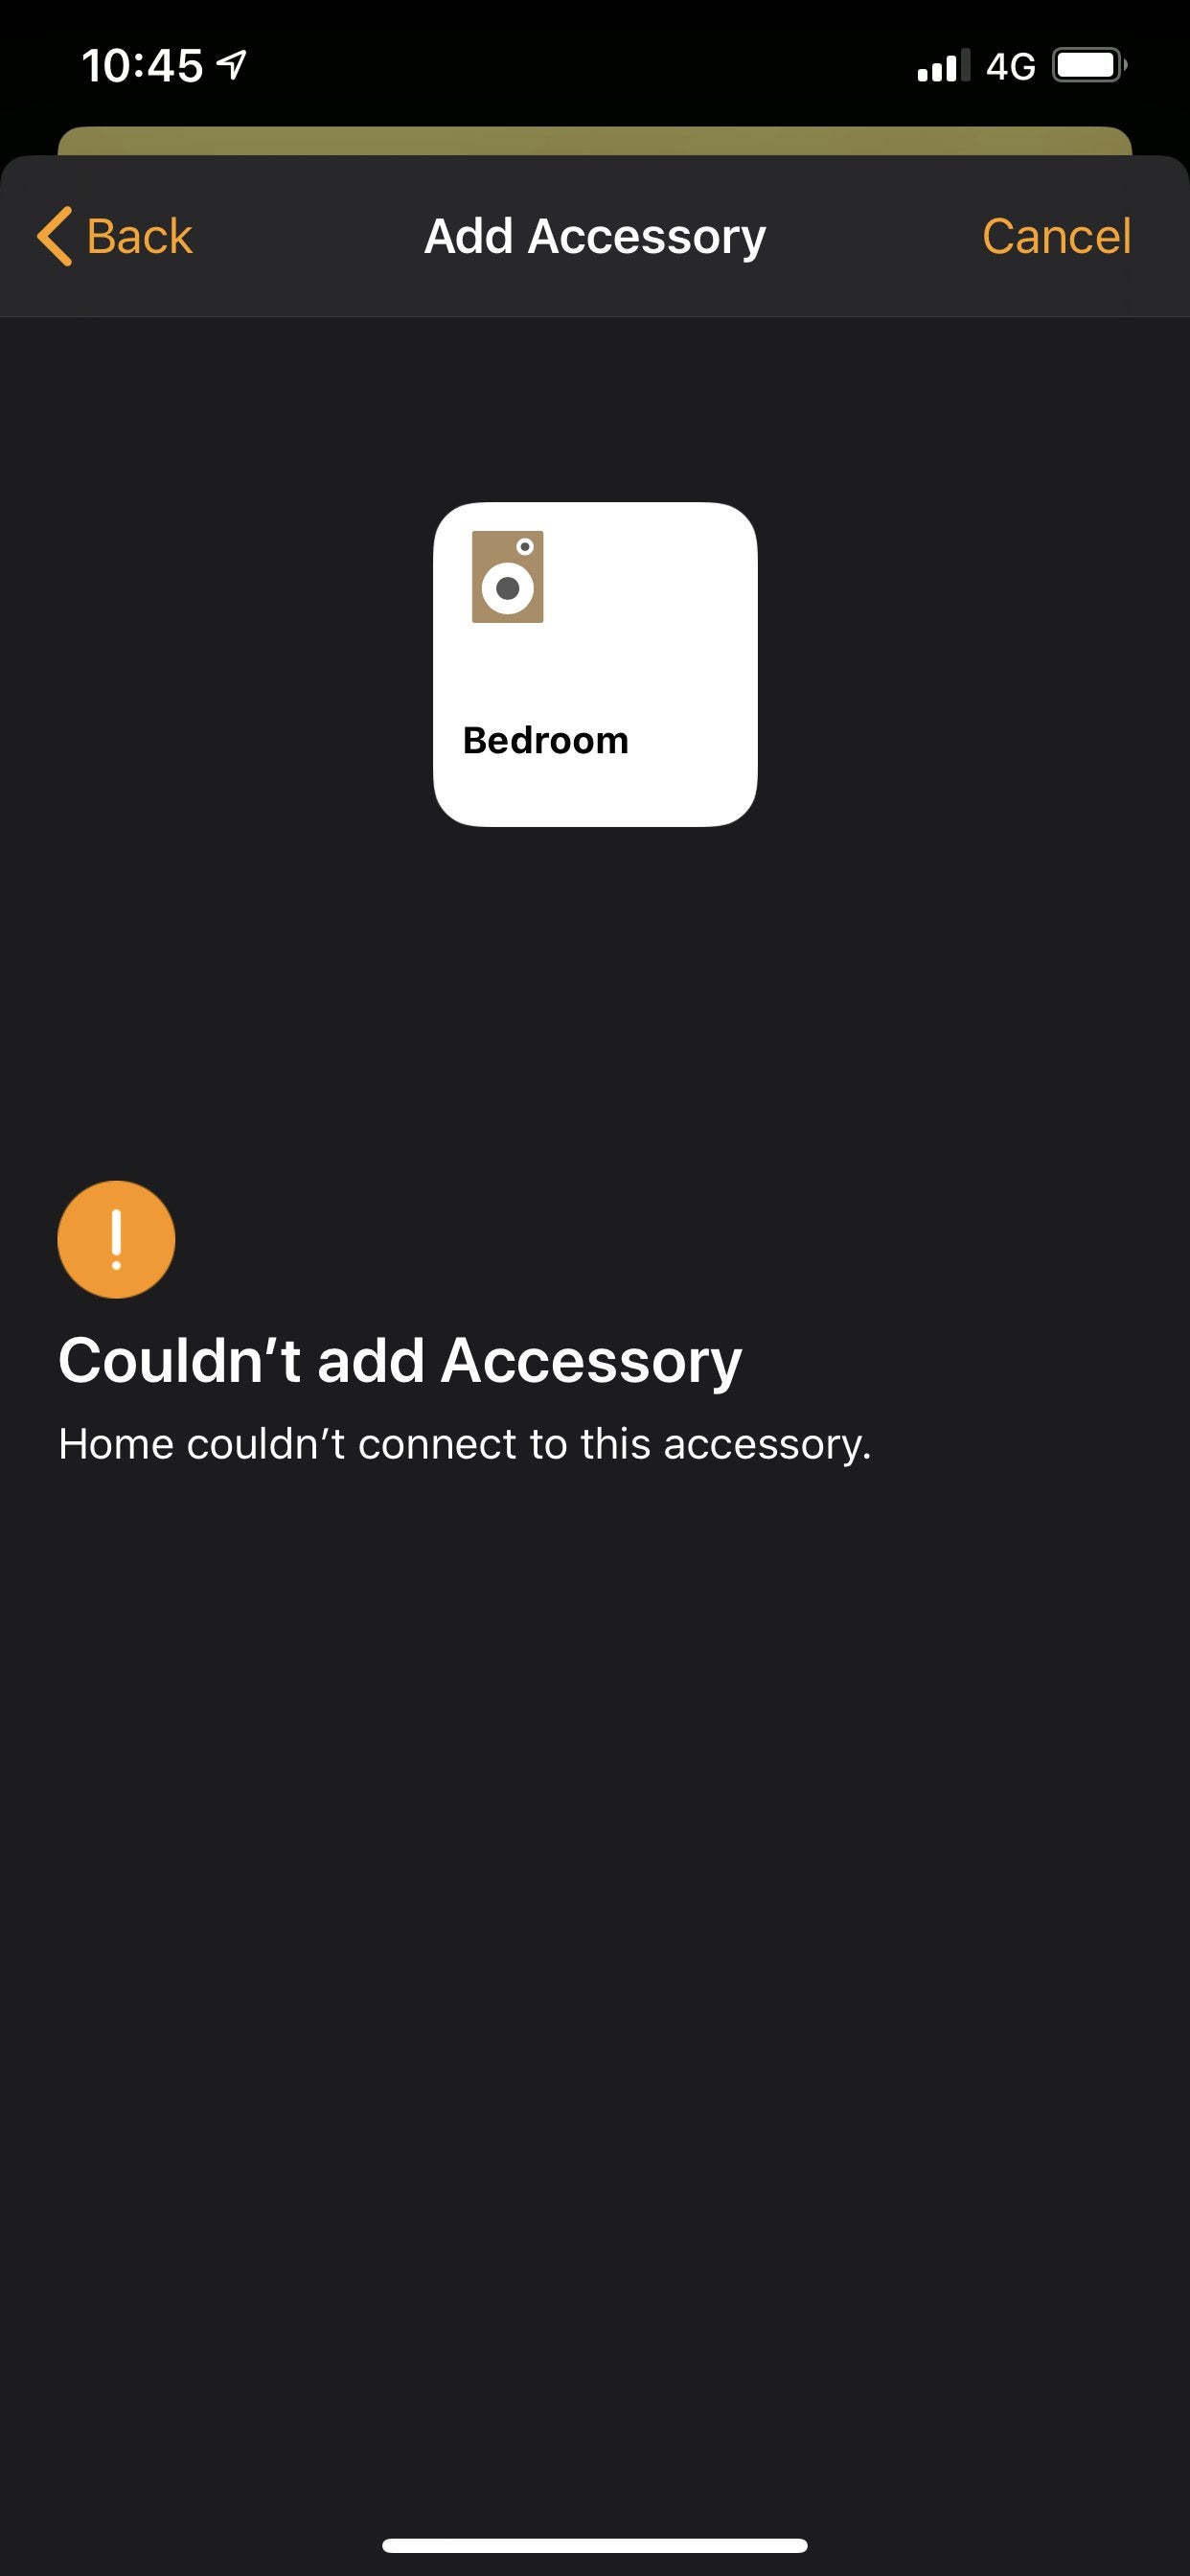 You have this problem constantly when trying to connect Sonos